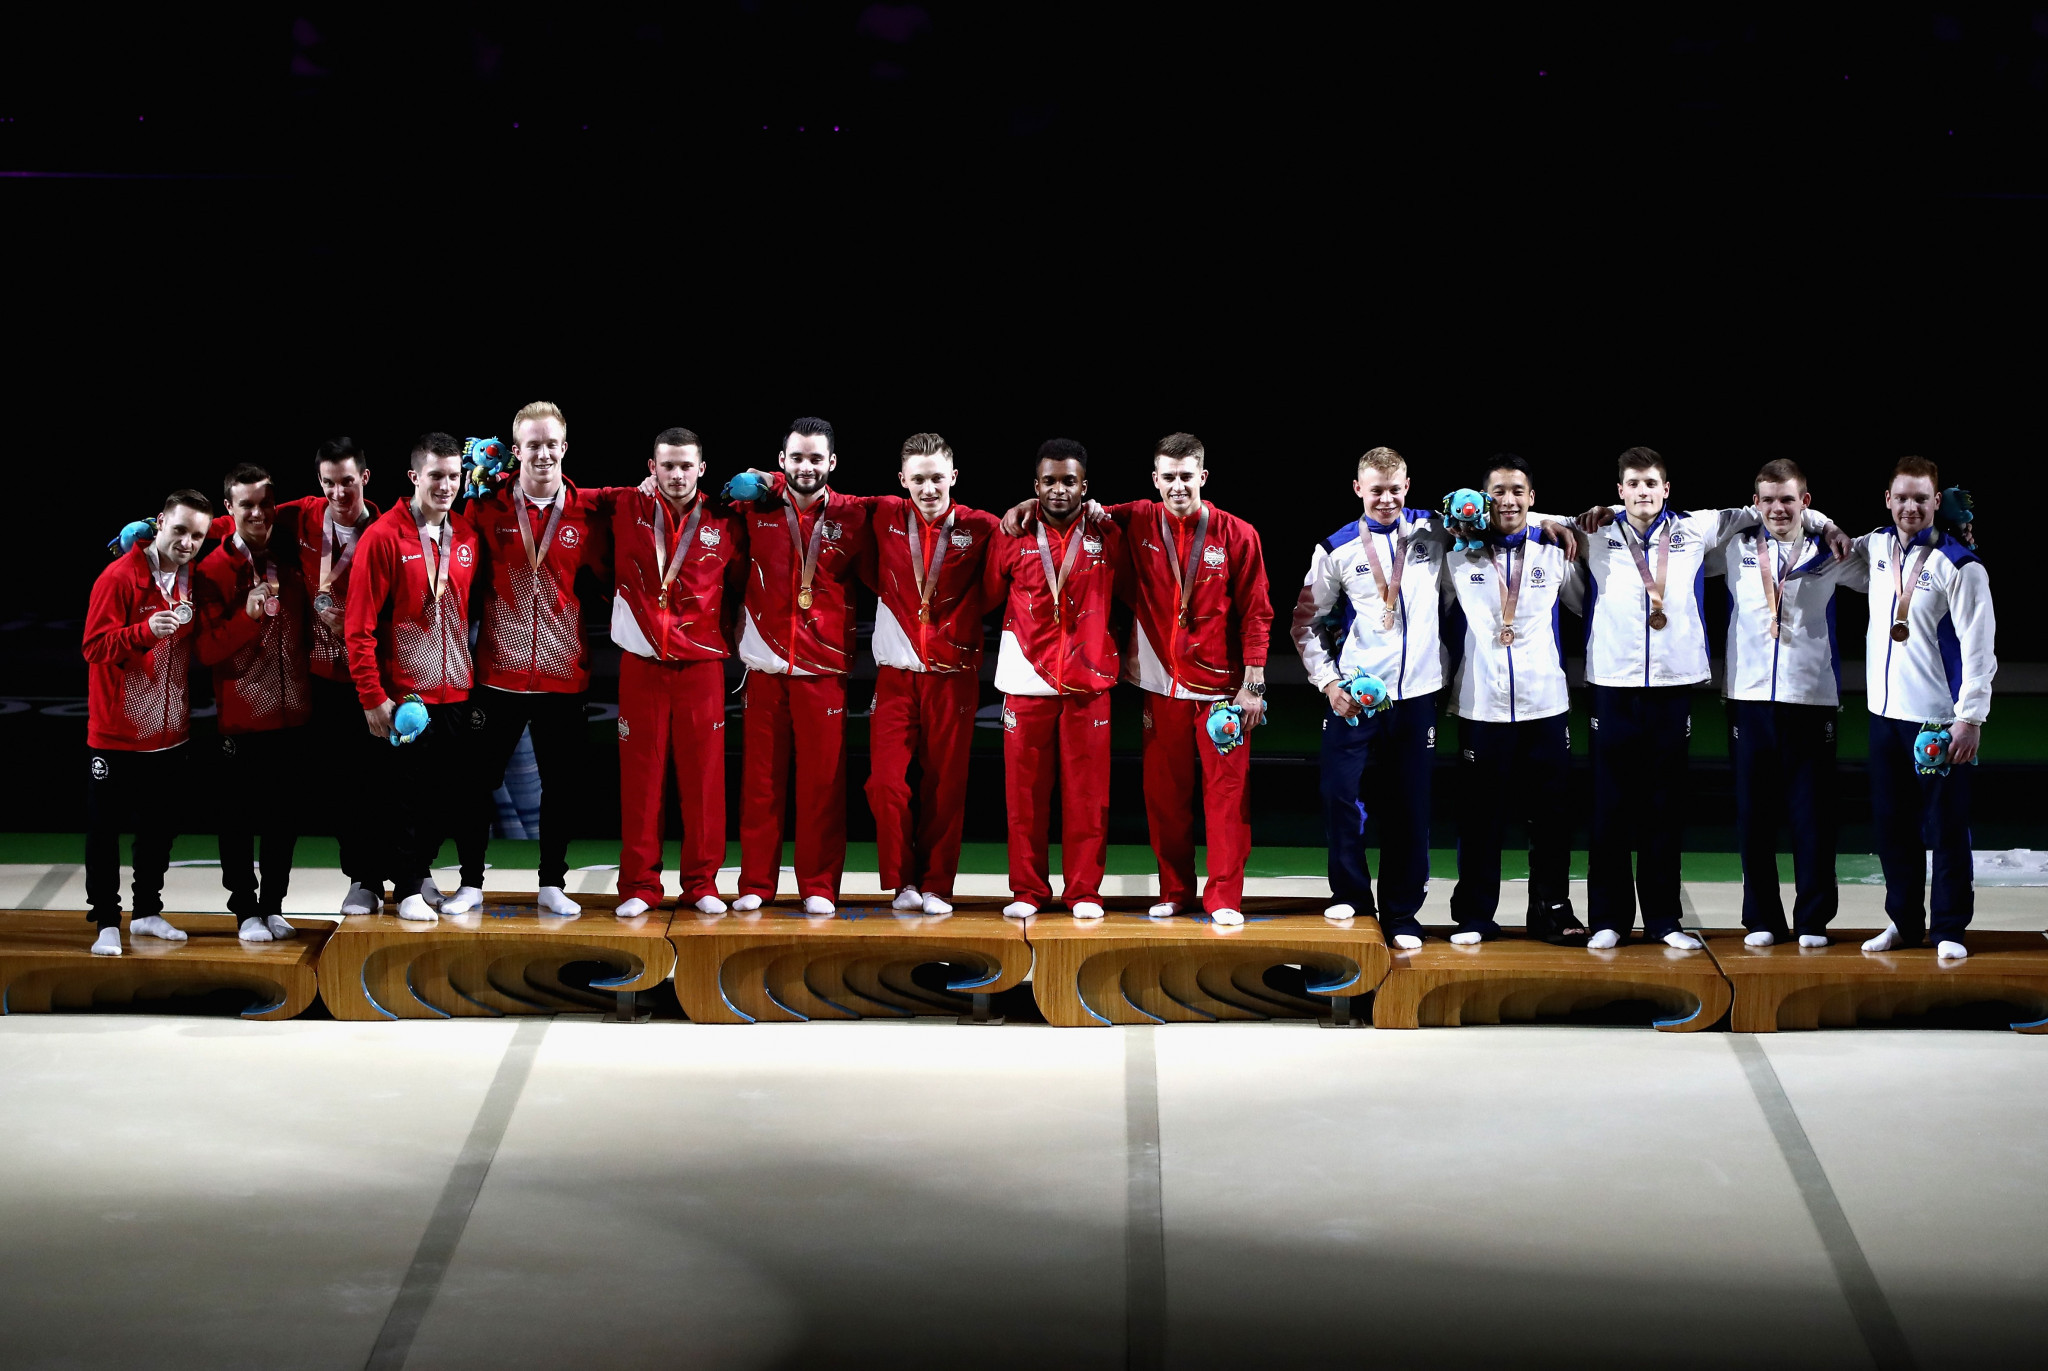 Gold Coast 2018 team medallists England, Canada and Scotland have been named in the same subdivision for the men's artistic gymnastics competition at Birmingham 2022 ©Getty Images